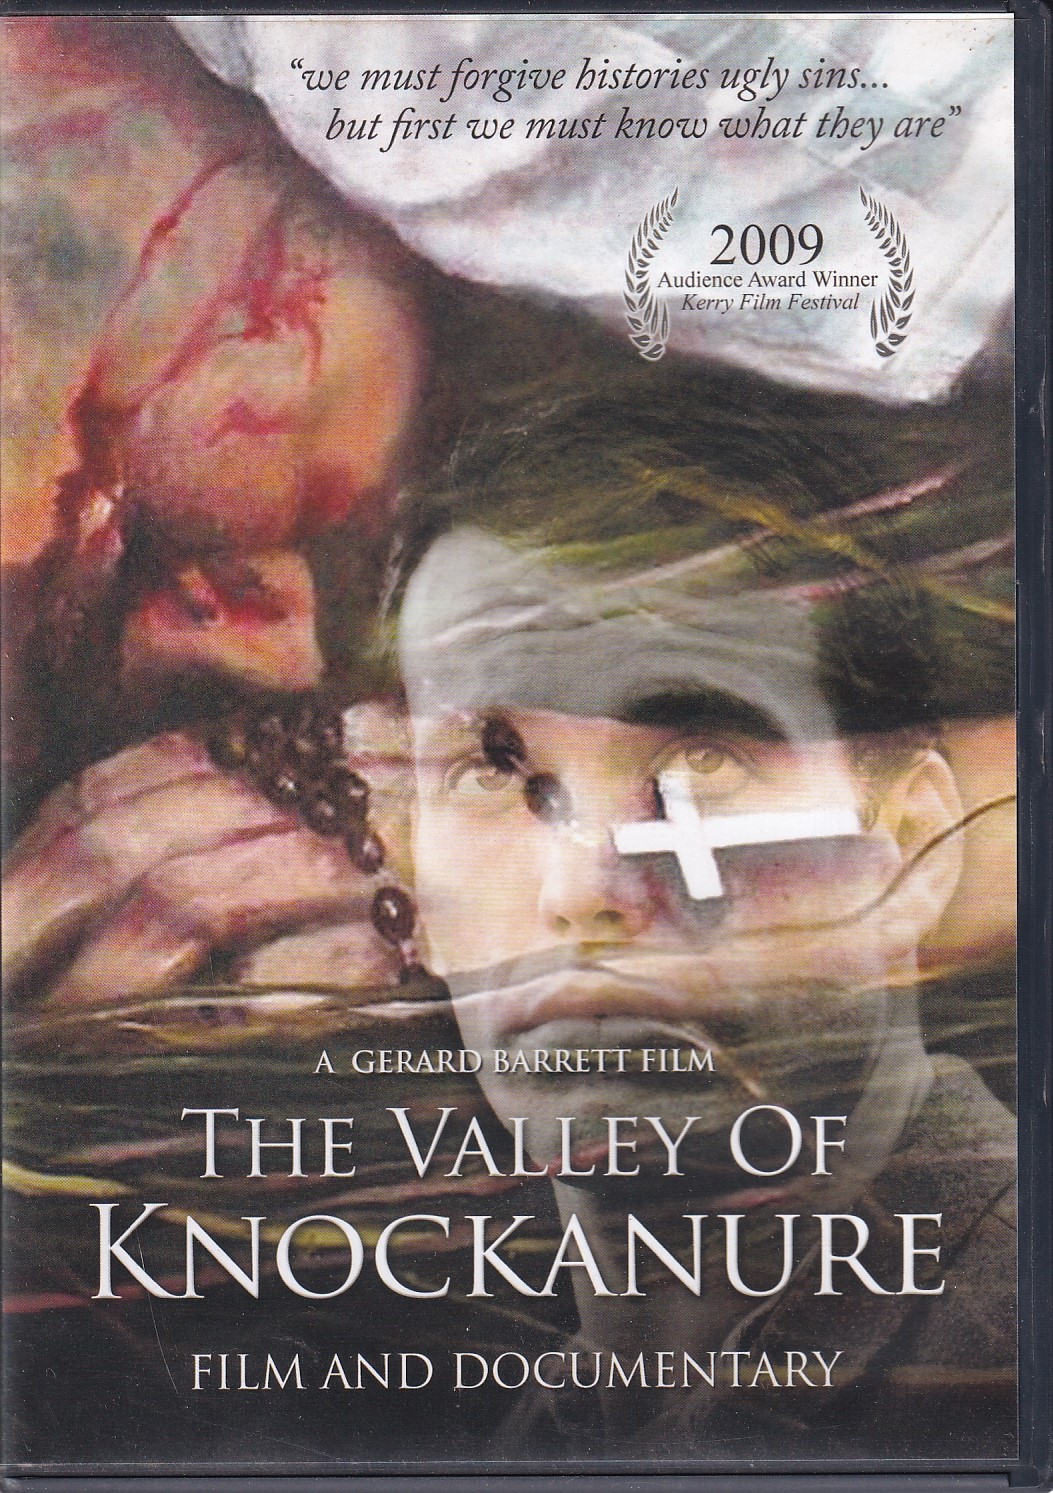 The Valley of Knockanure [DVD] by Gerard Barrett